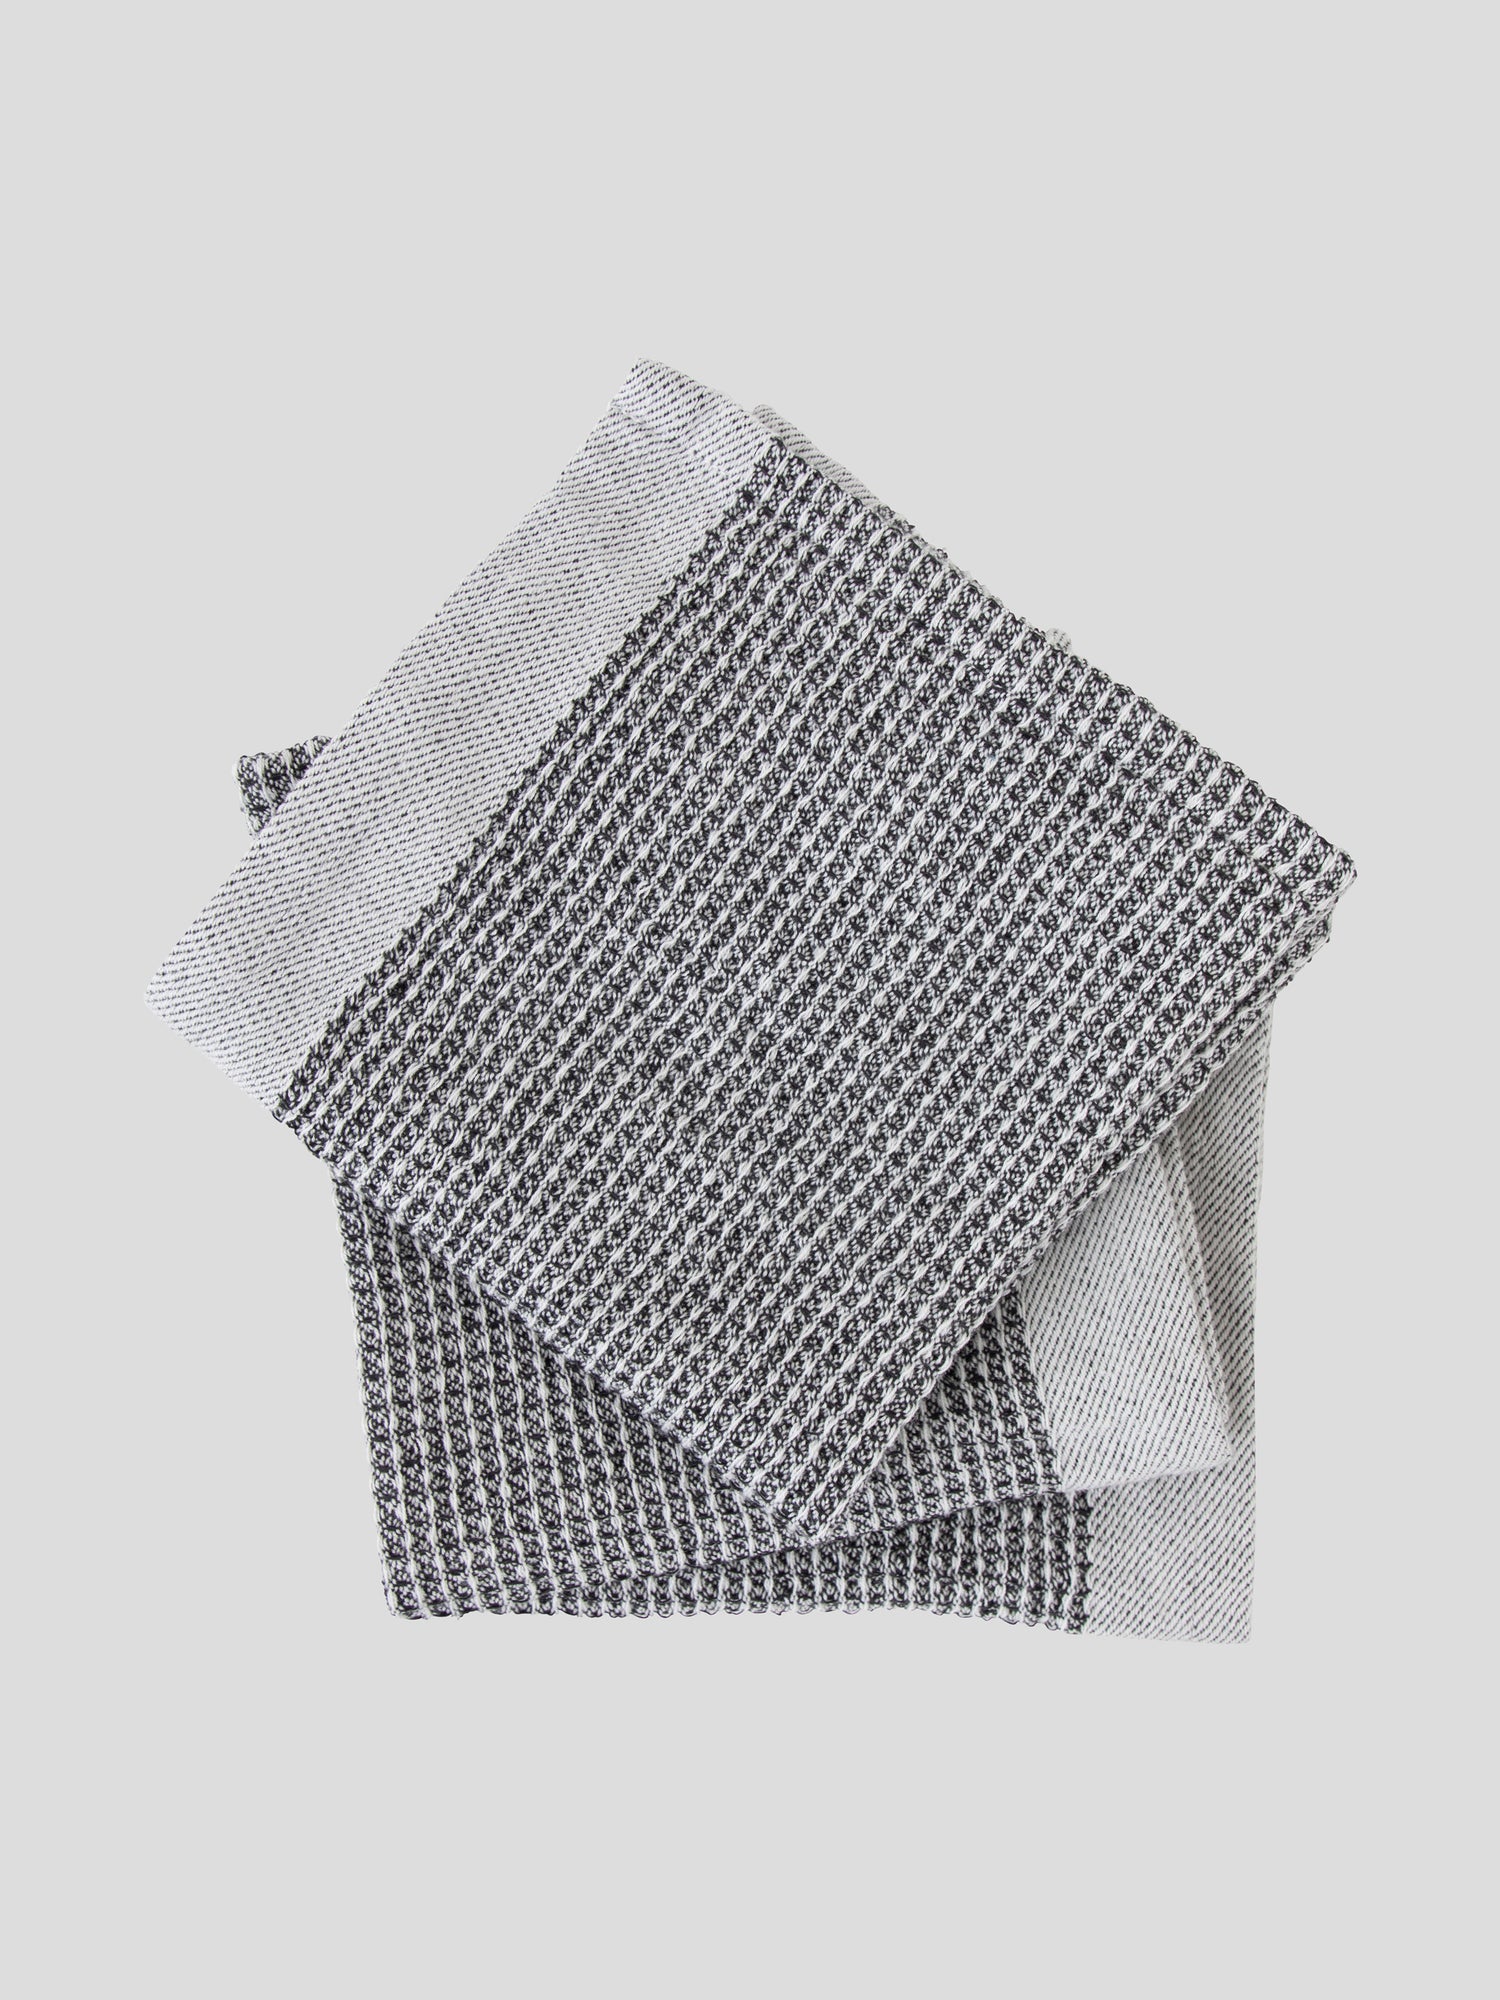 https://www.wallacecotton.com/content/products/organic-cotton-waffle-washcloth-set-of-3-black-white-1-7646.jpg?width=1500